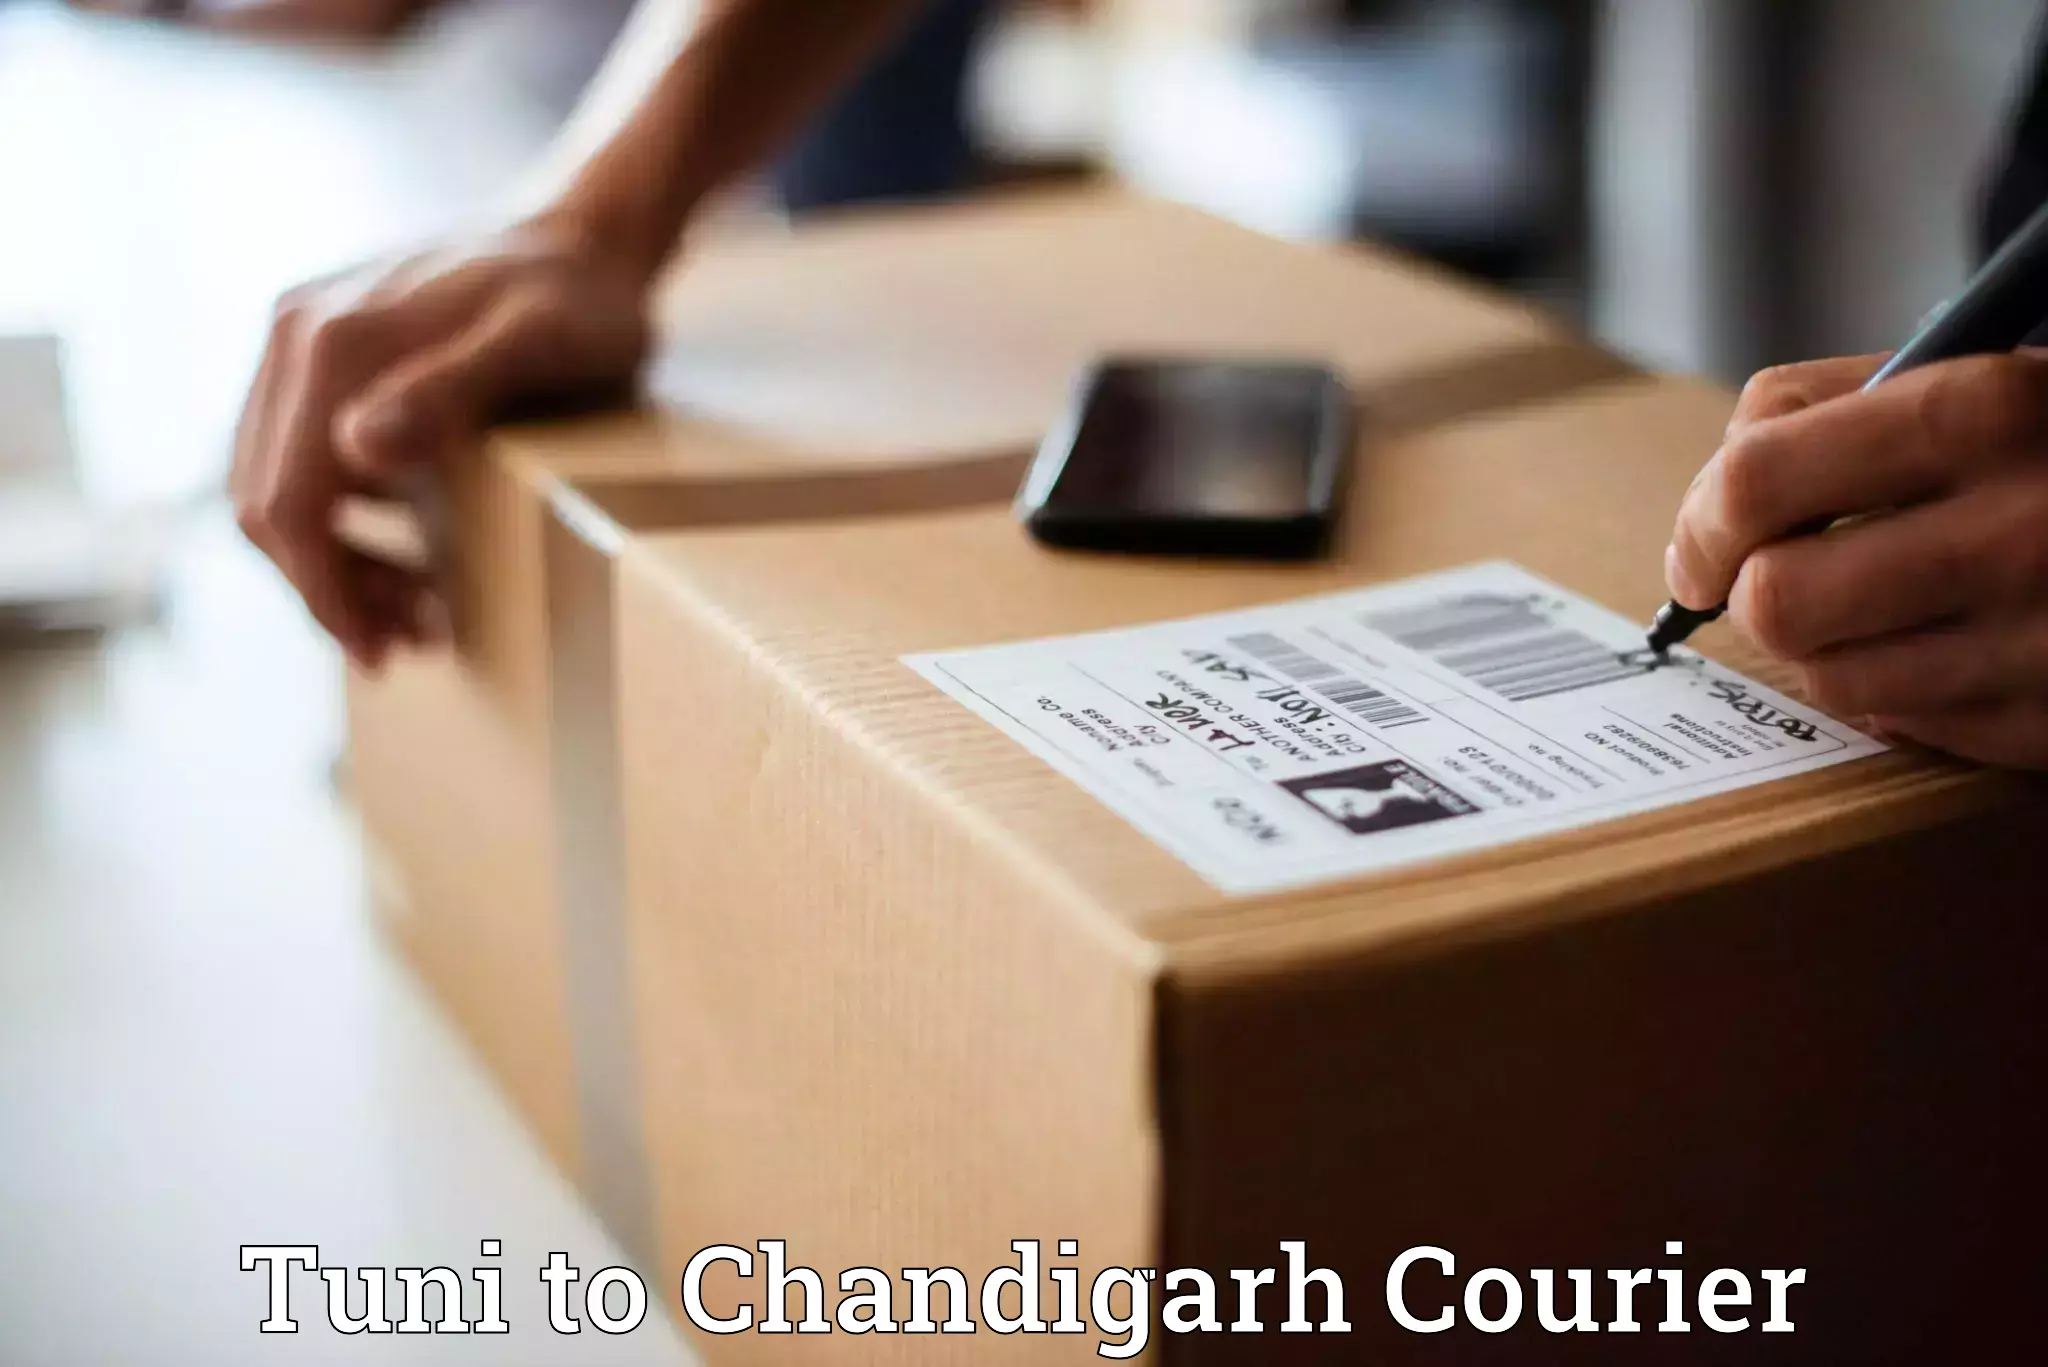 24/7 courier service in Tuni to Chandigarh